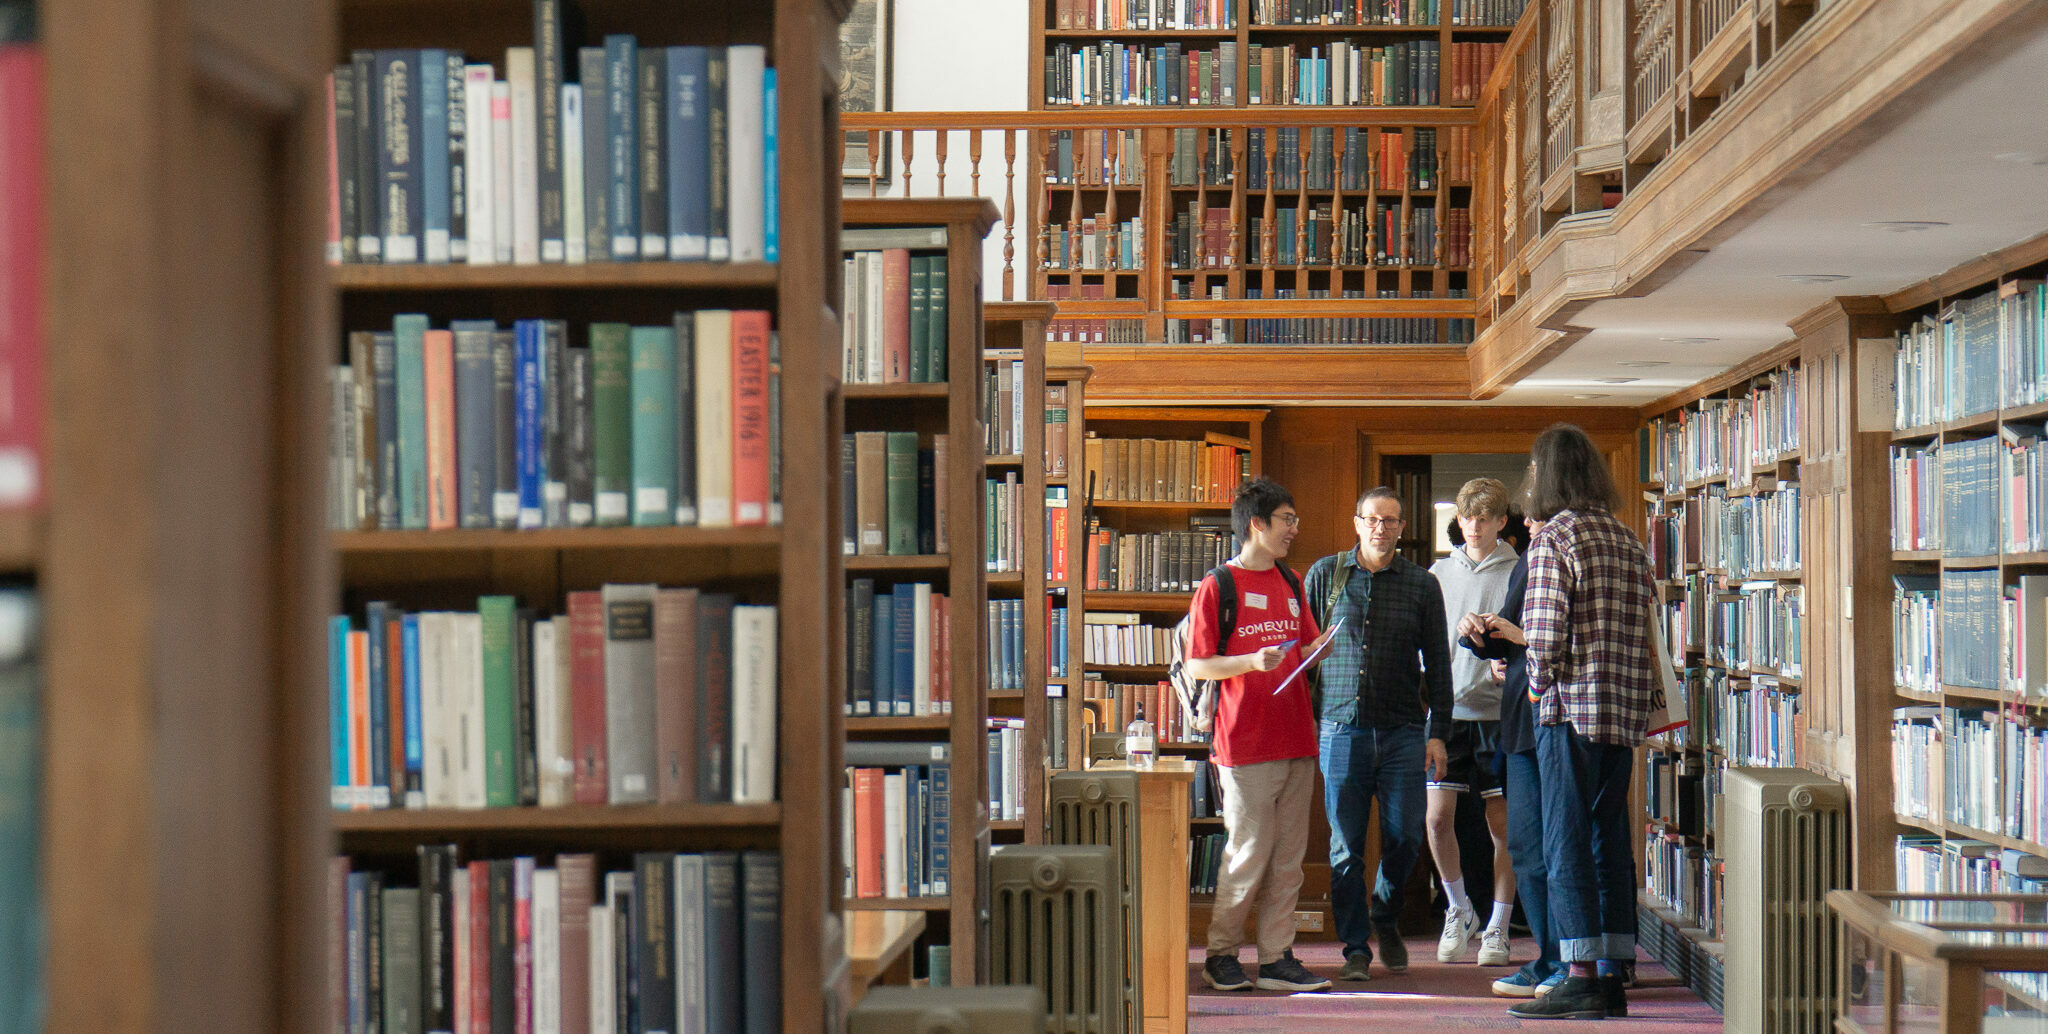 Prospective applicants receive a tour of the library during our 2022 Open Days